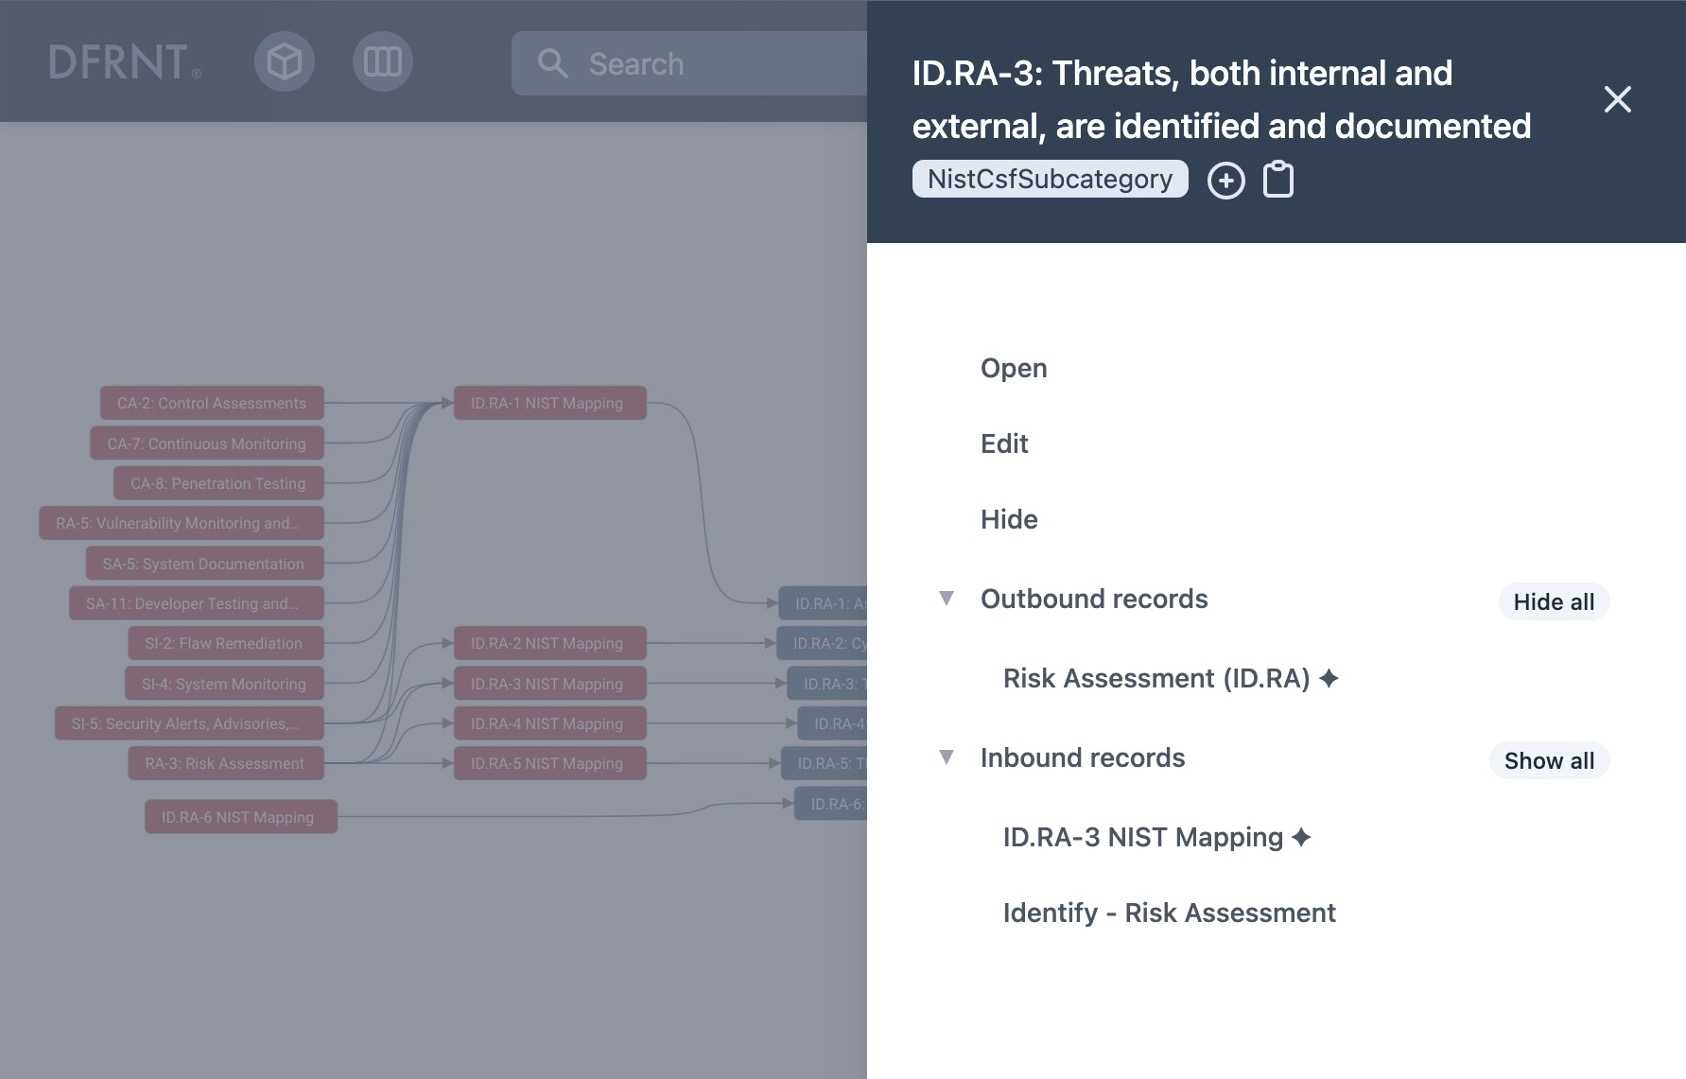 Screenshot of a data product with the NIST Cybersecurity Framework Security Controls mapped against NIST 800-53r5